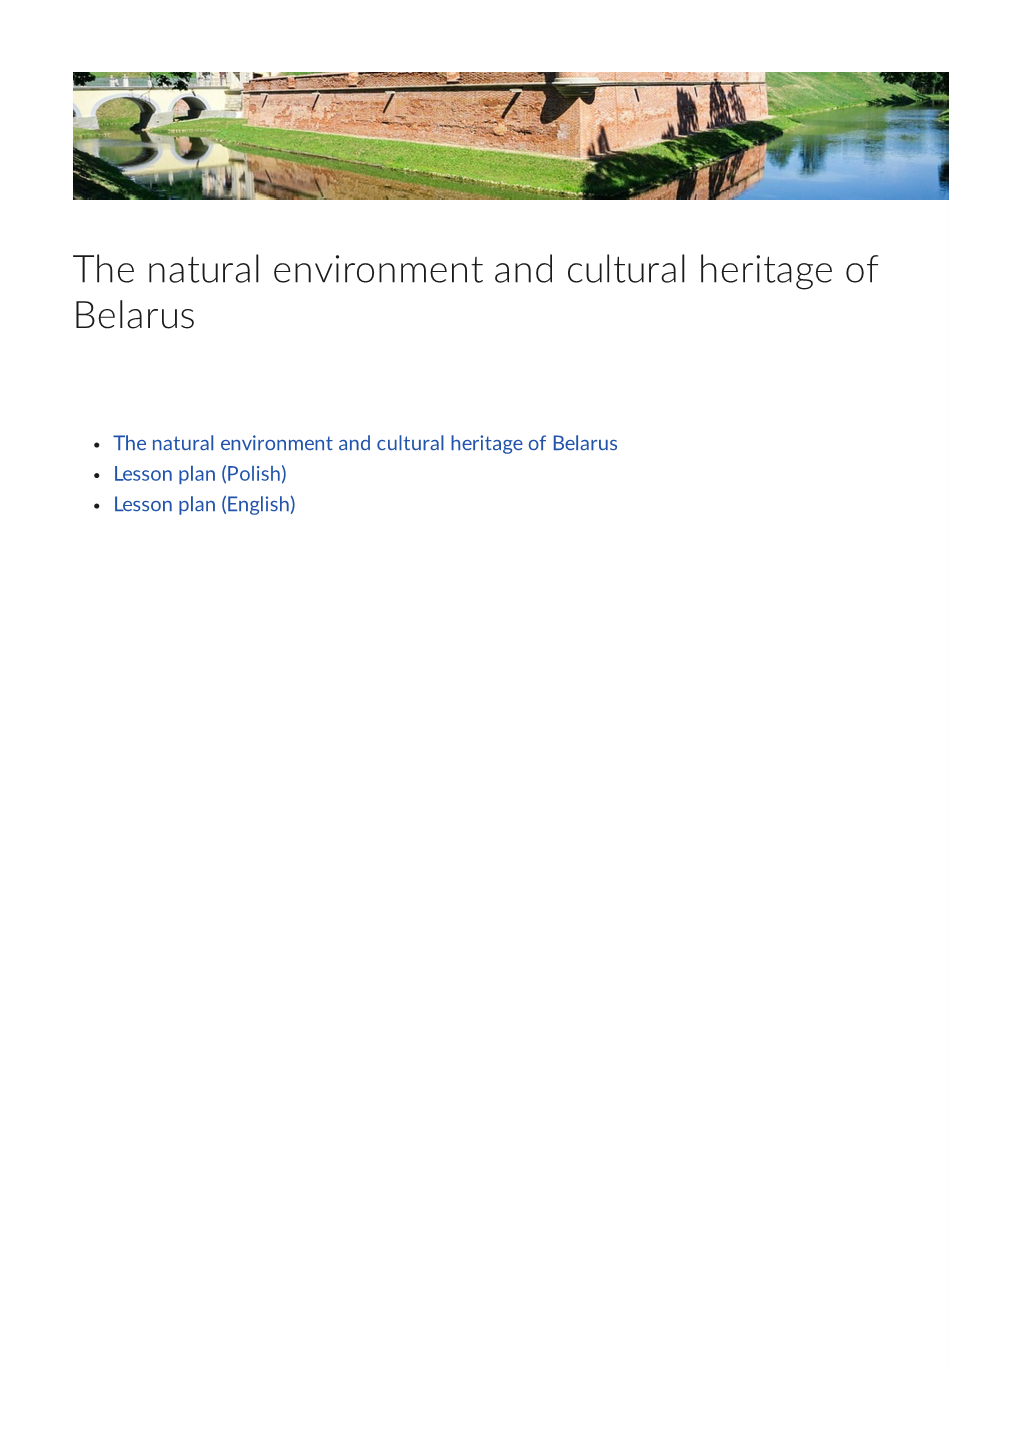 The Natural Environment and Cultural Heritage of Belarus